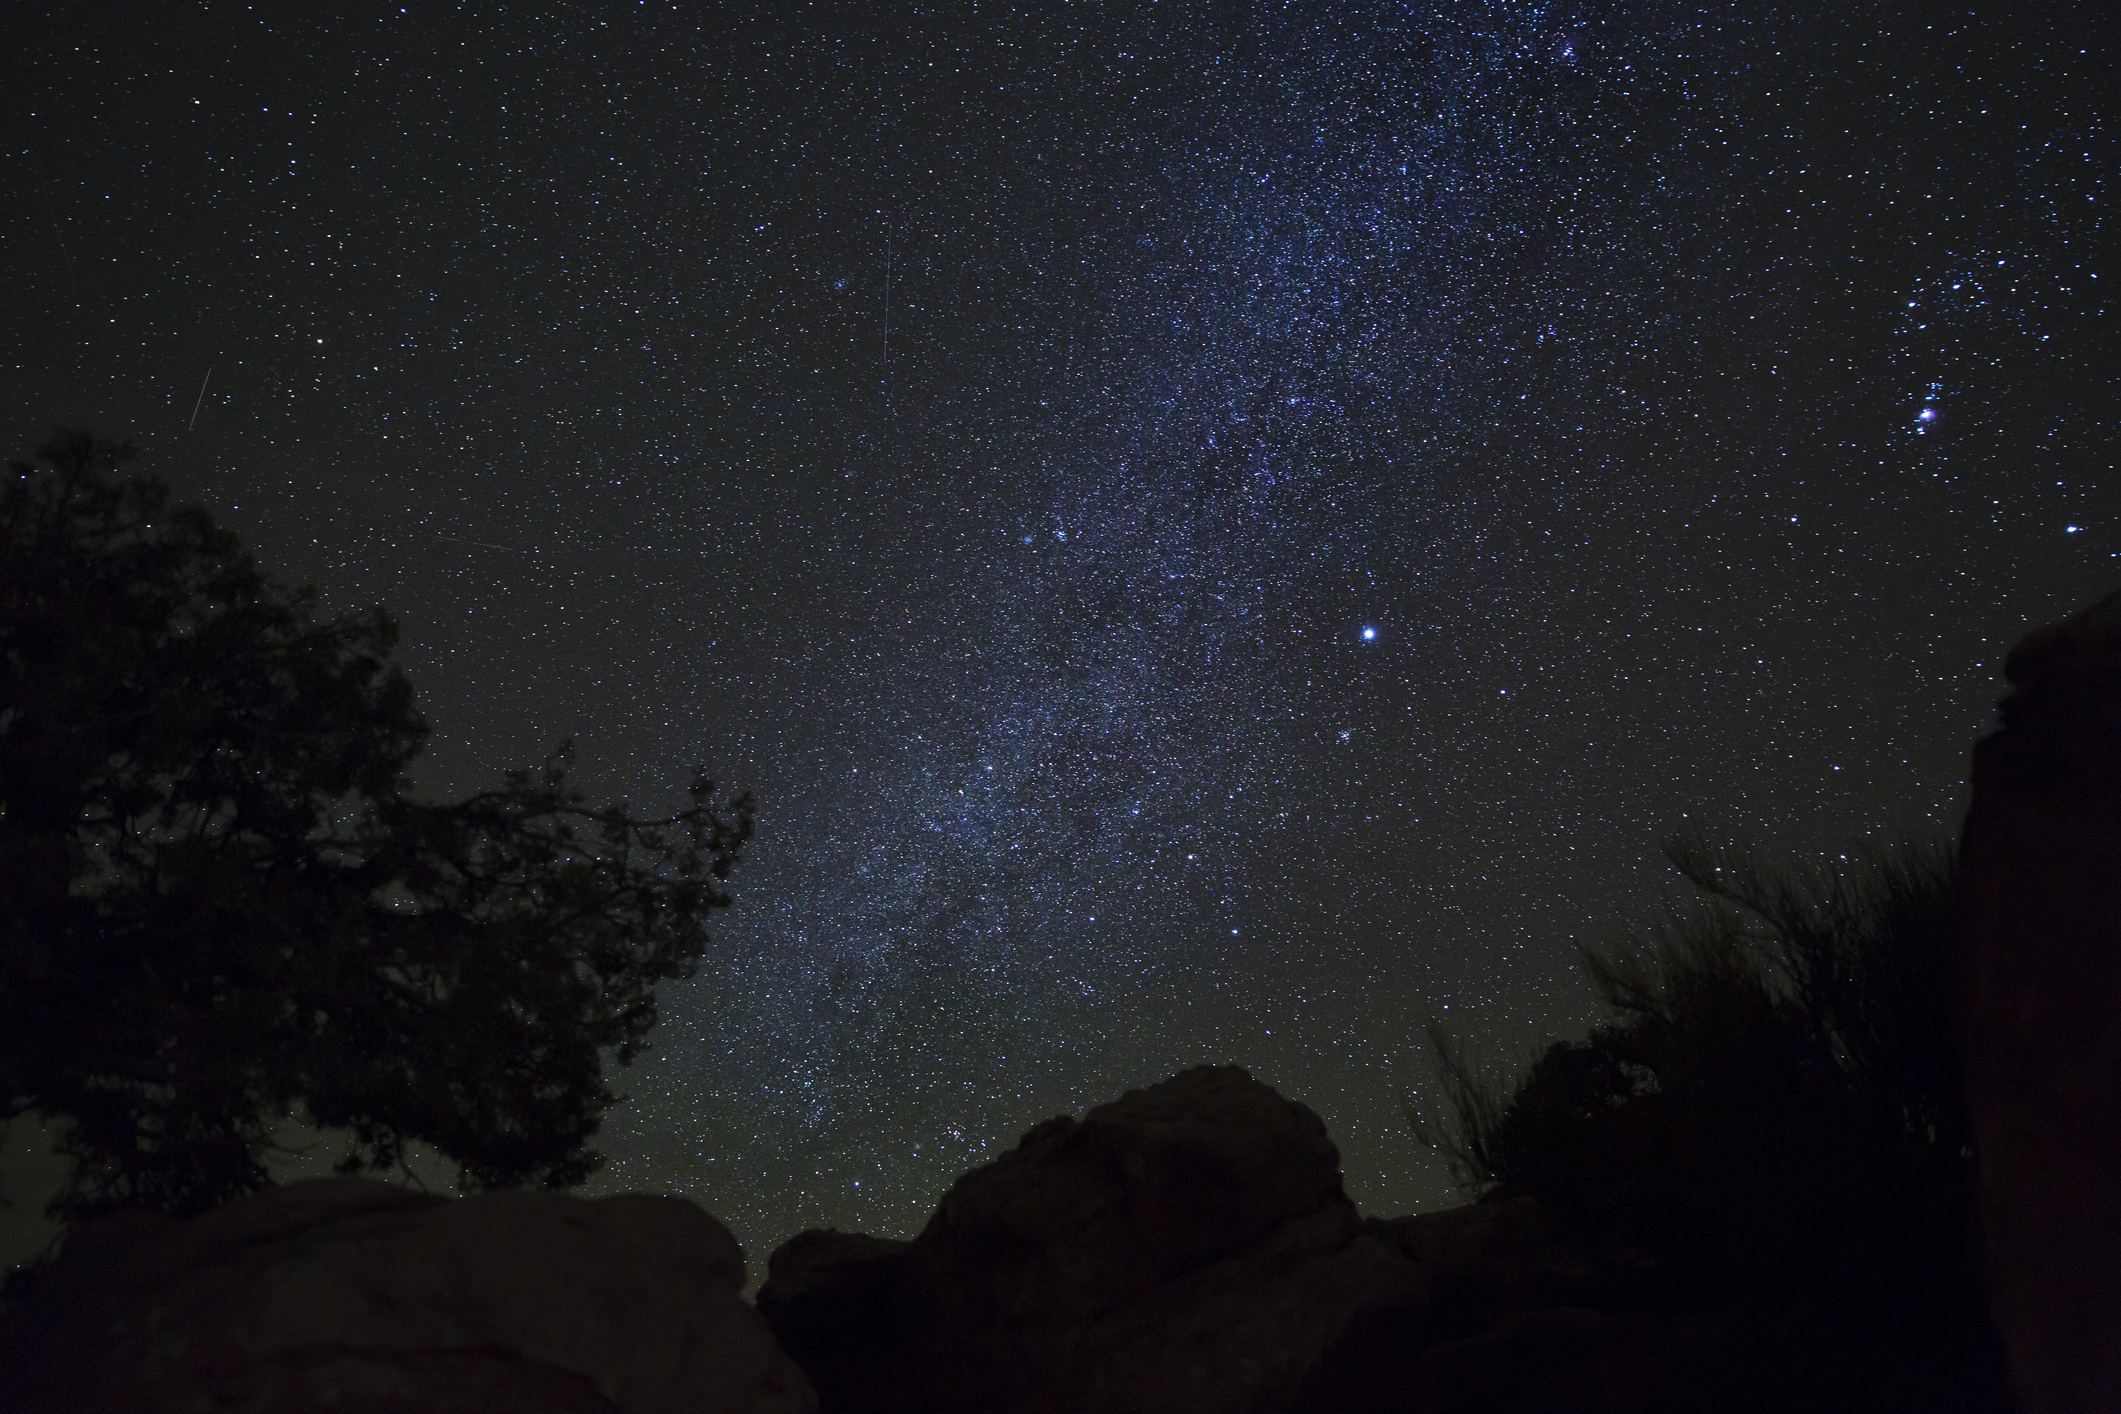 starry sky above silhouettes of trees and rocks.